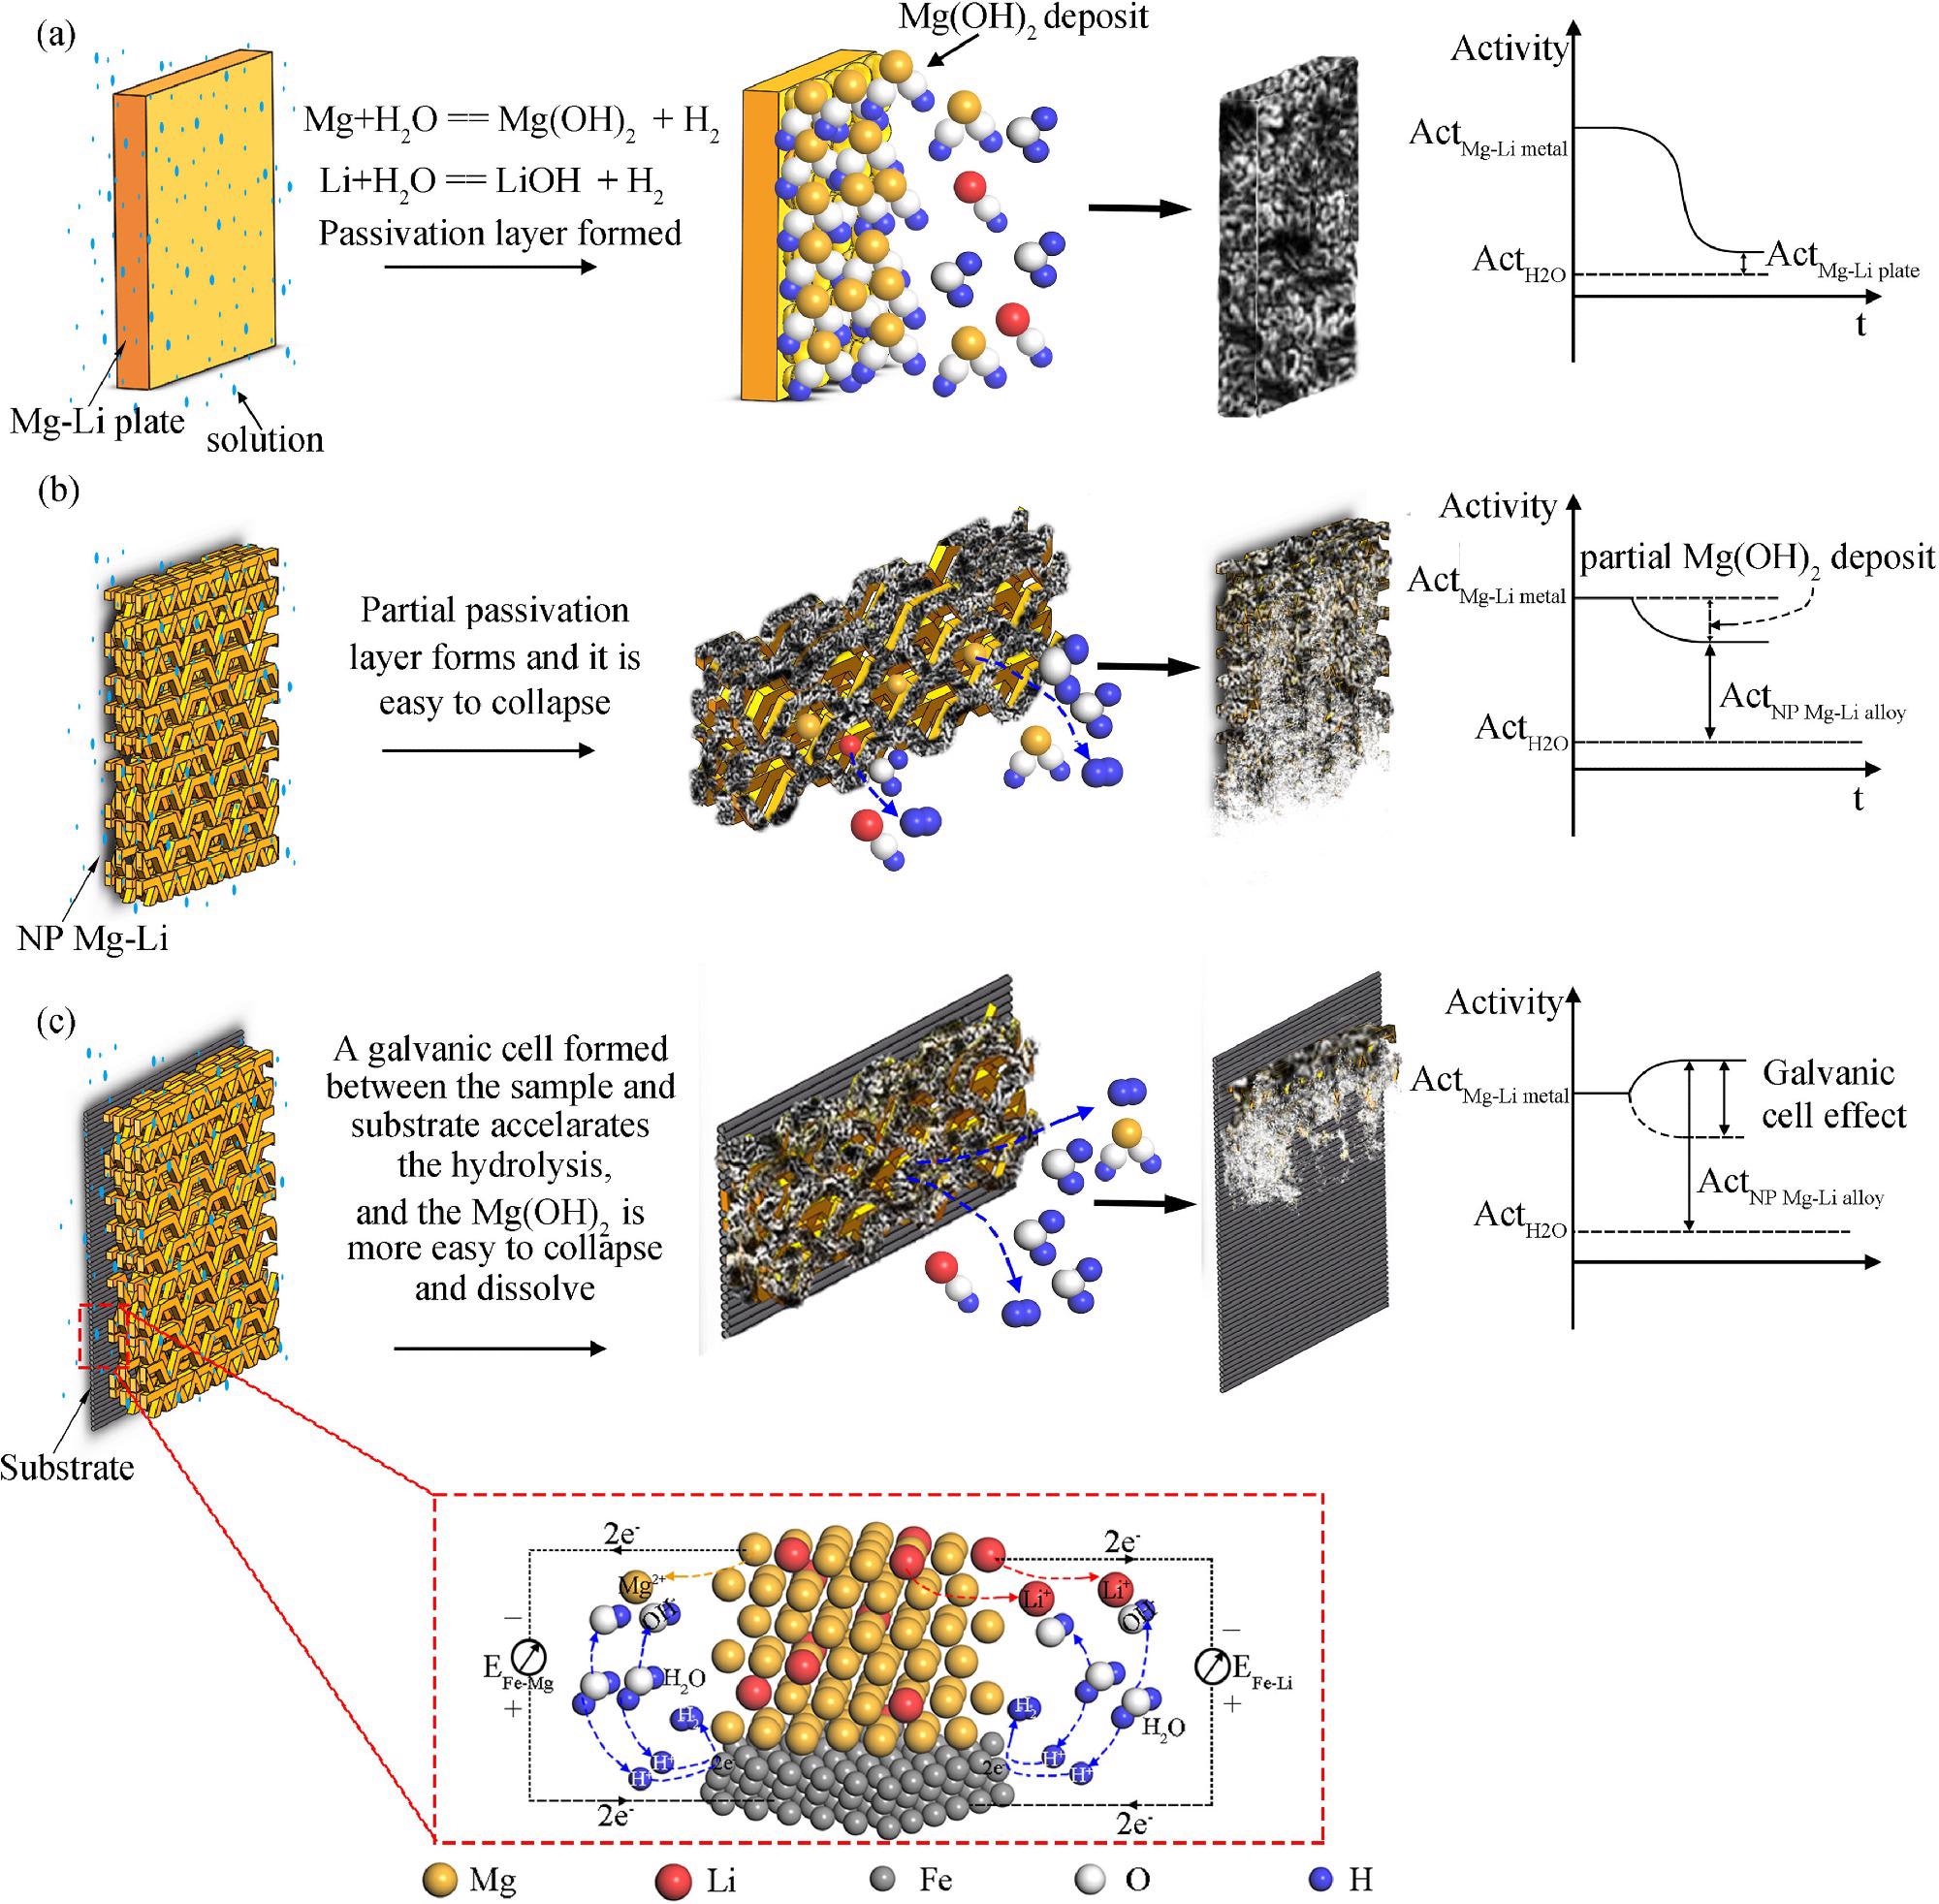 The hydrogen generation mechanisms for three different Mg-Li alloys: (a) the as-received Mg-Li alloy plate, (b) the nanoporous Mg-Li material, (c) the nanoporous Mg-Li material with substrate.